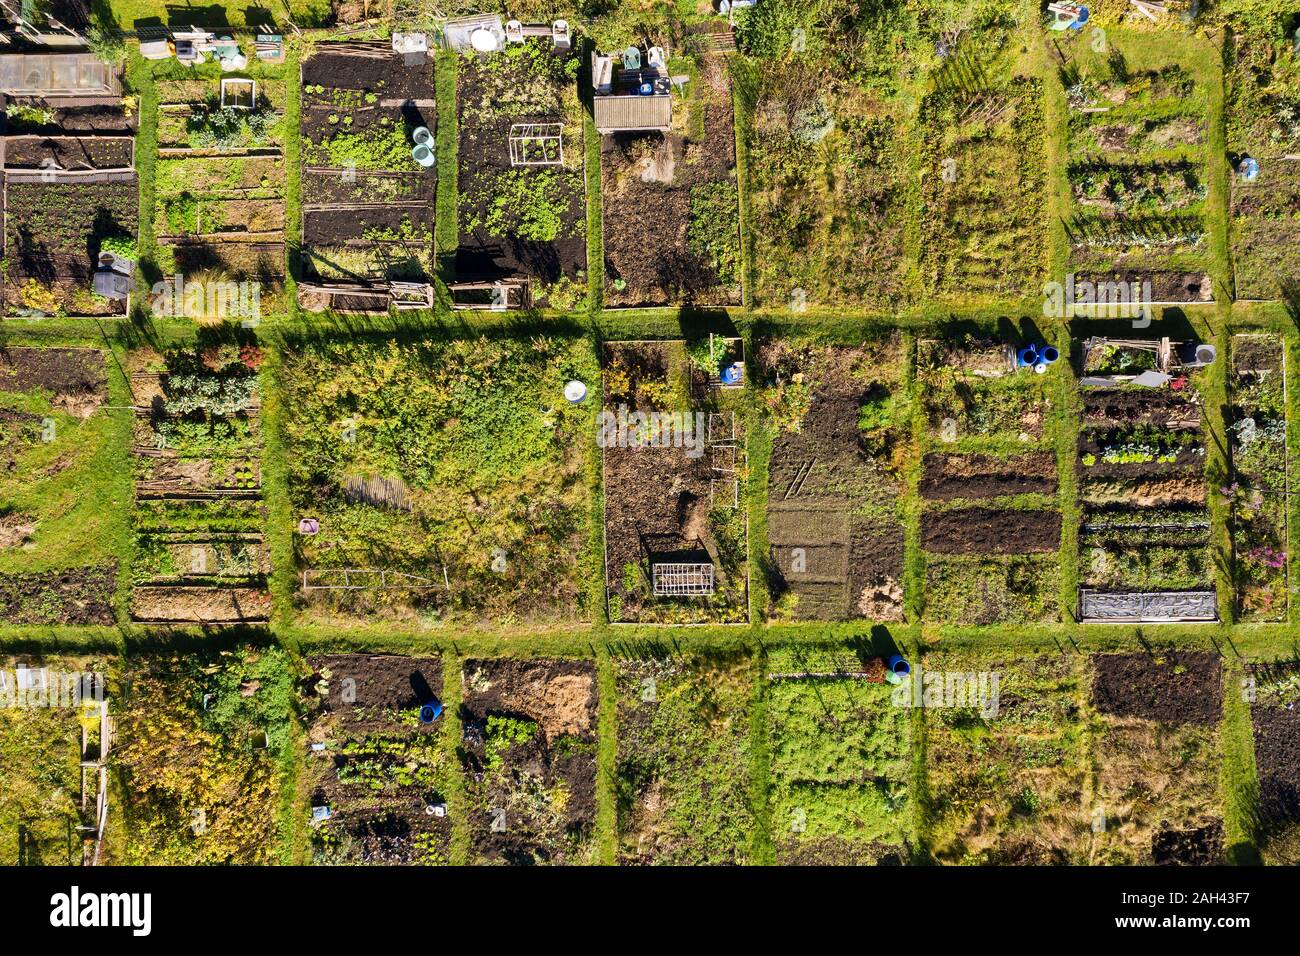 Germany, Bavaria, Geretsried, Aerial view of rows of community gardens Stock Photo